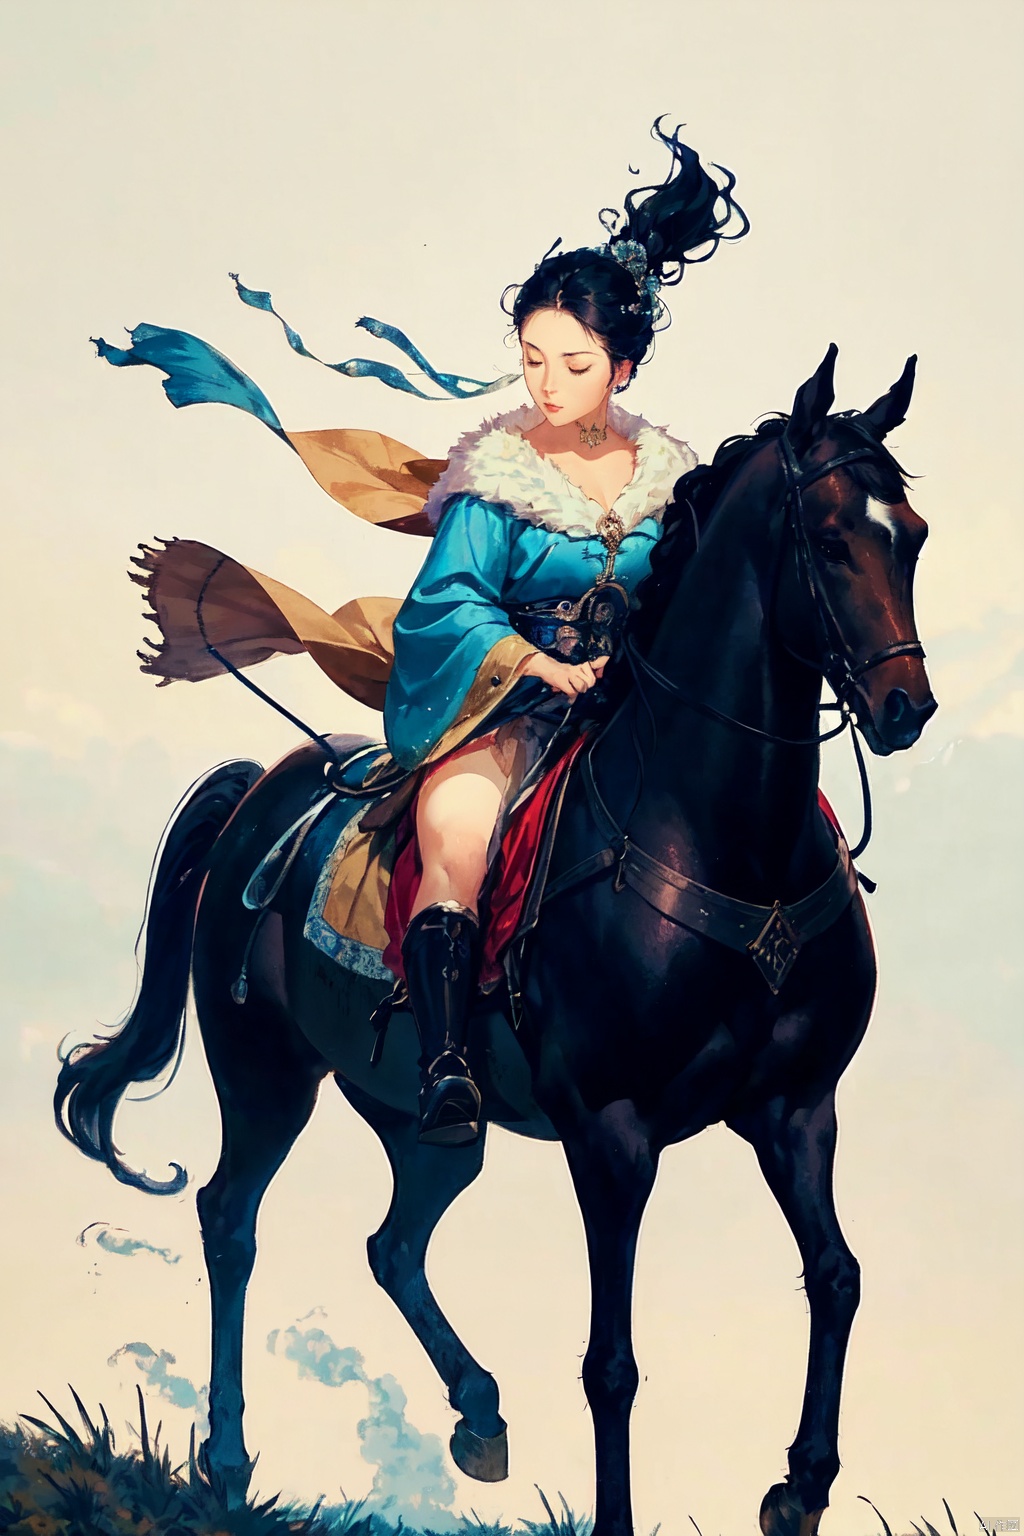  The image is a captivating scene of a woman dressed in a flowing blue outfit, riding a horse that is a mix of a fish and a horse. The woman's dress accentuates her elegance and grace, while her hair is styled in an intricate updo. The horse has a fish-like tail and back legs and horse-like front legs. The lighting in the image is soft and diffused, creating a dreamy atmosphere. The colors are vibrant and rich, with the blue hues in the woman's dress and the horse's fur standing out against the white background. The image is well-composed and skillfully executed, with the woman and the horse occupying the majority of the frame. The quality of the image is excellent, with no visible noise or graininess. The image can be described as dreamy and ethereal, capturing a moment of beauty and tranquility. The use of fantasy elements and the blending of different creatures adds a unique touch to the scene. Overall, the image is a stunning piece of art that showcases the photographer's talent and creativity. It is a perfect representation of the photographer's style and skill in capturing moments of beauty and fantasy.